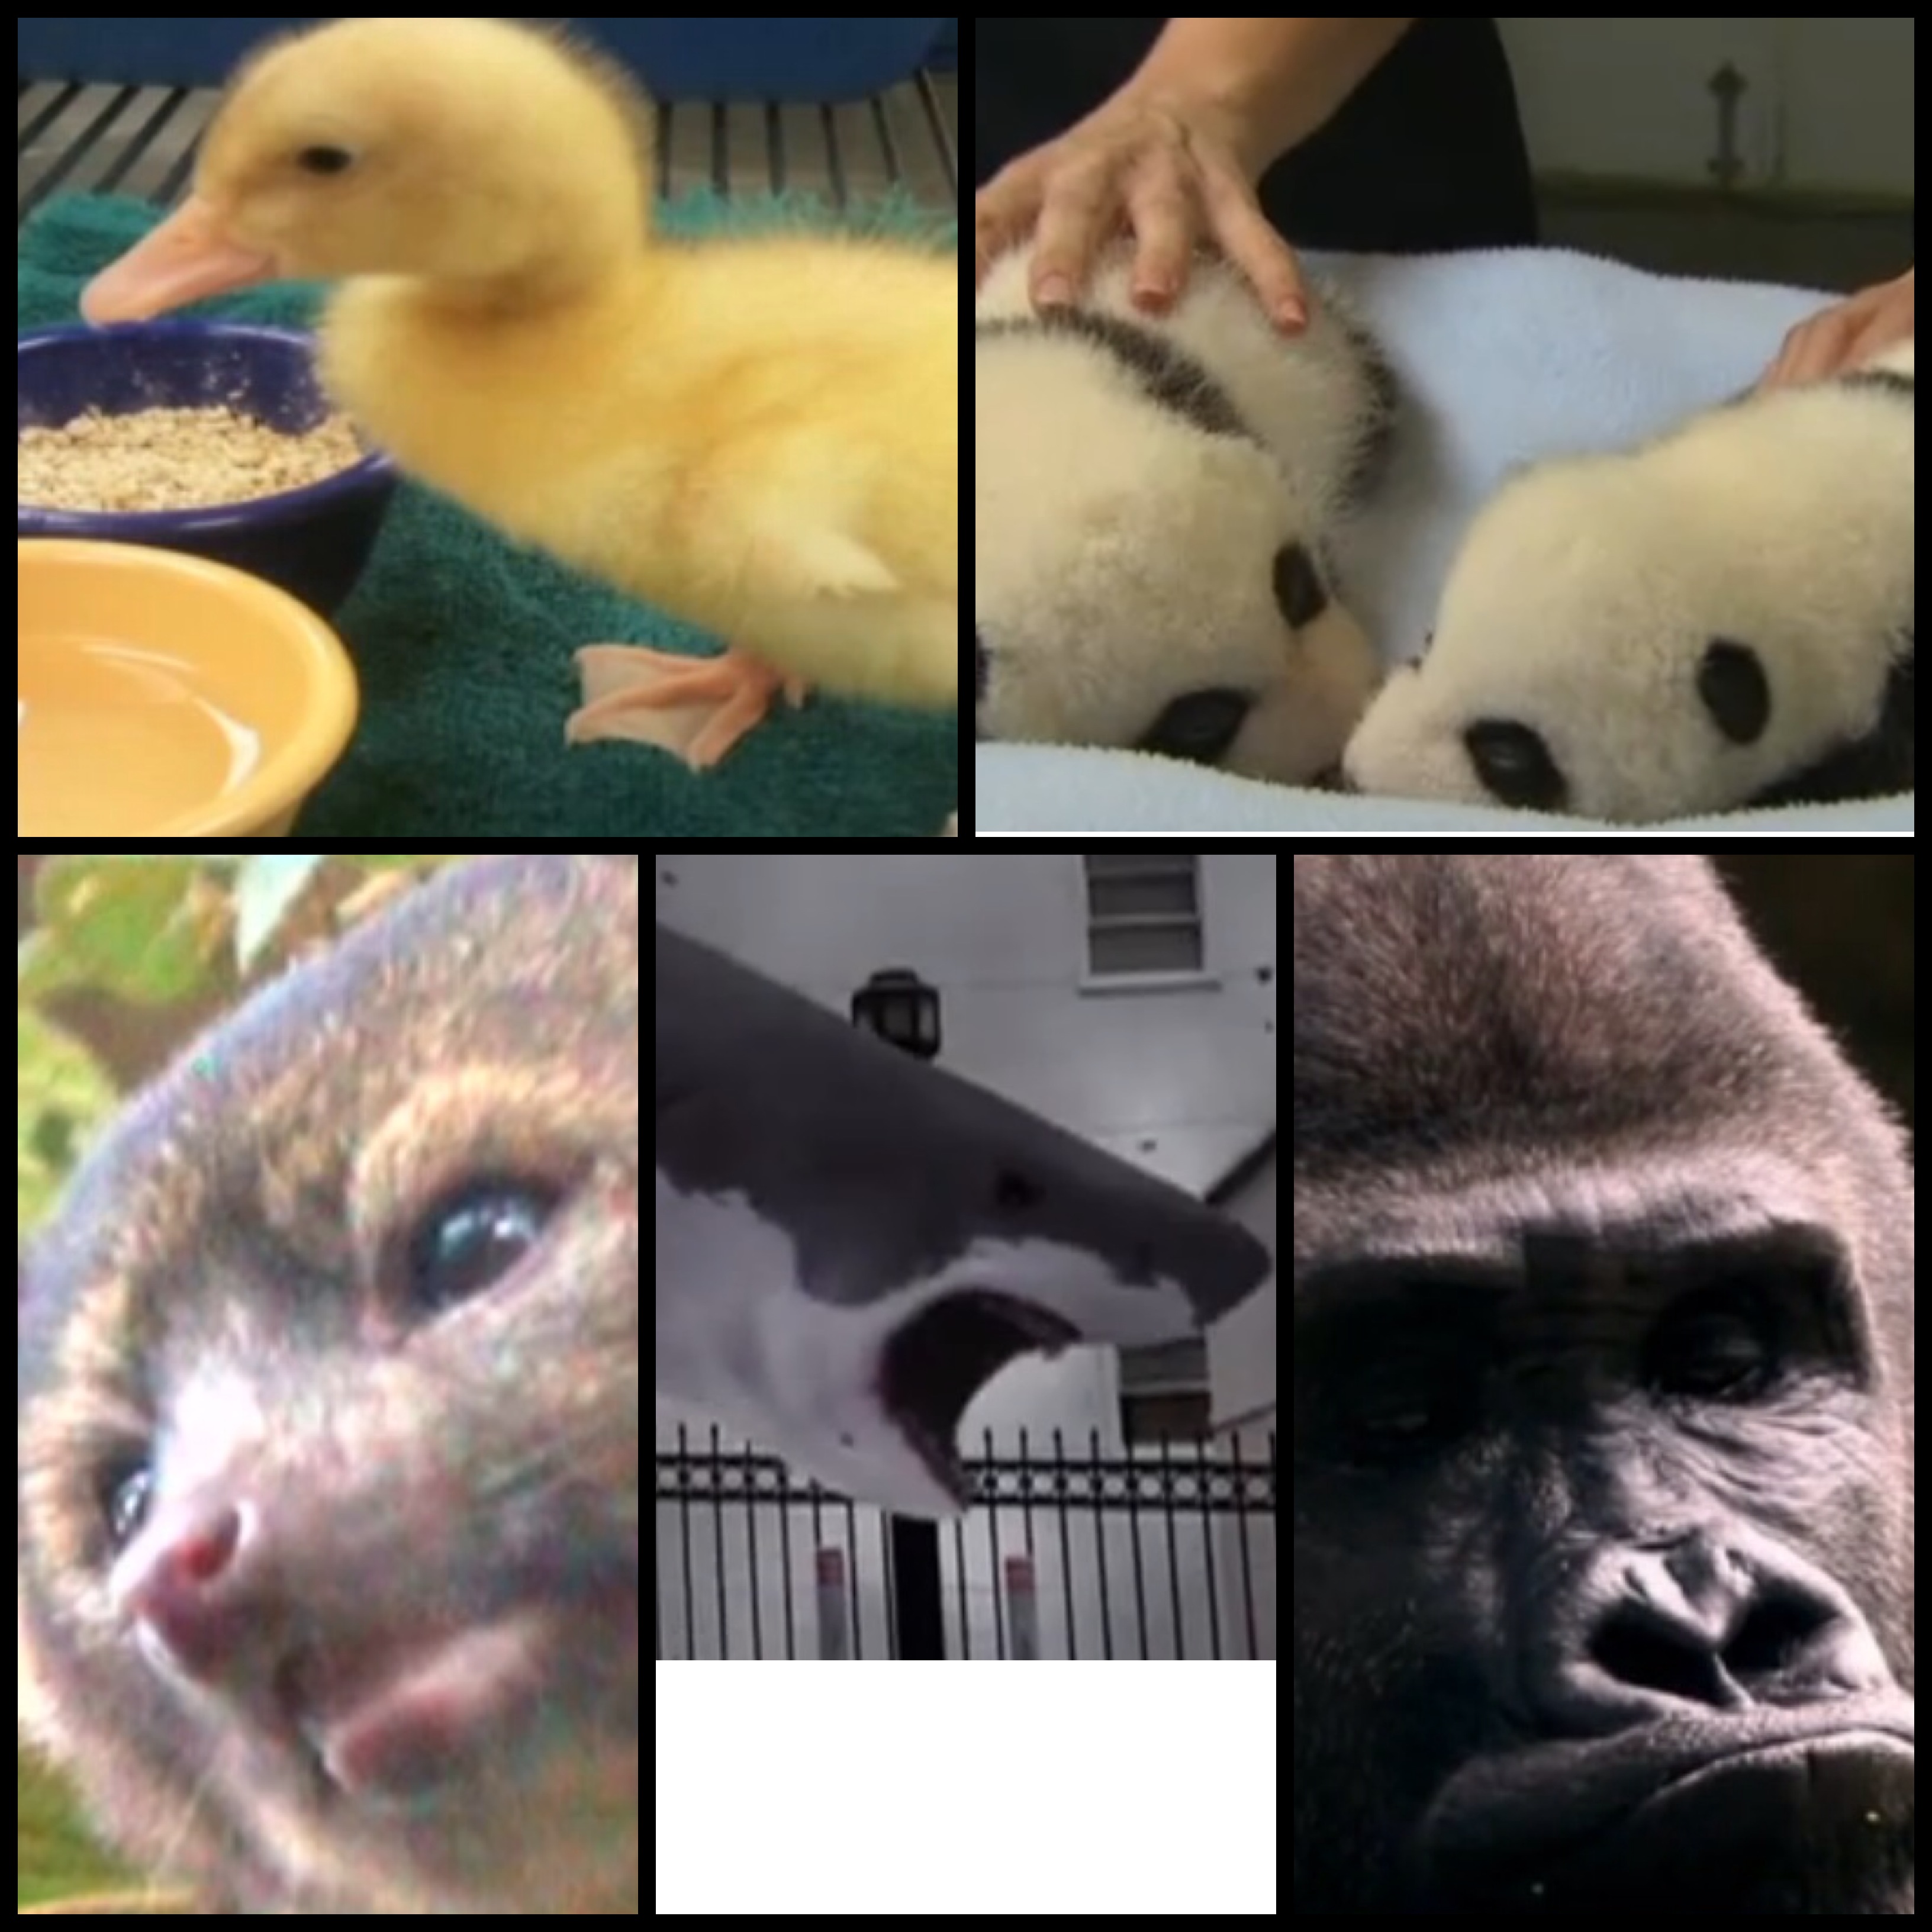 VOTE: What is your Favorite 'New Day' Animal Video from 2013?